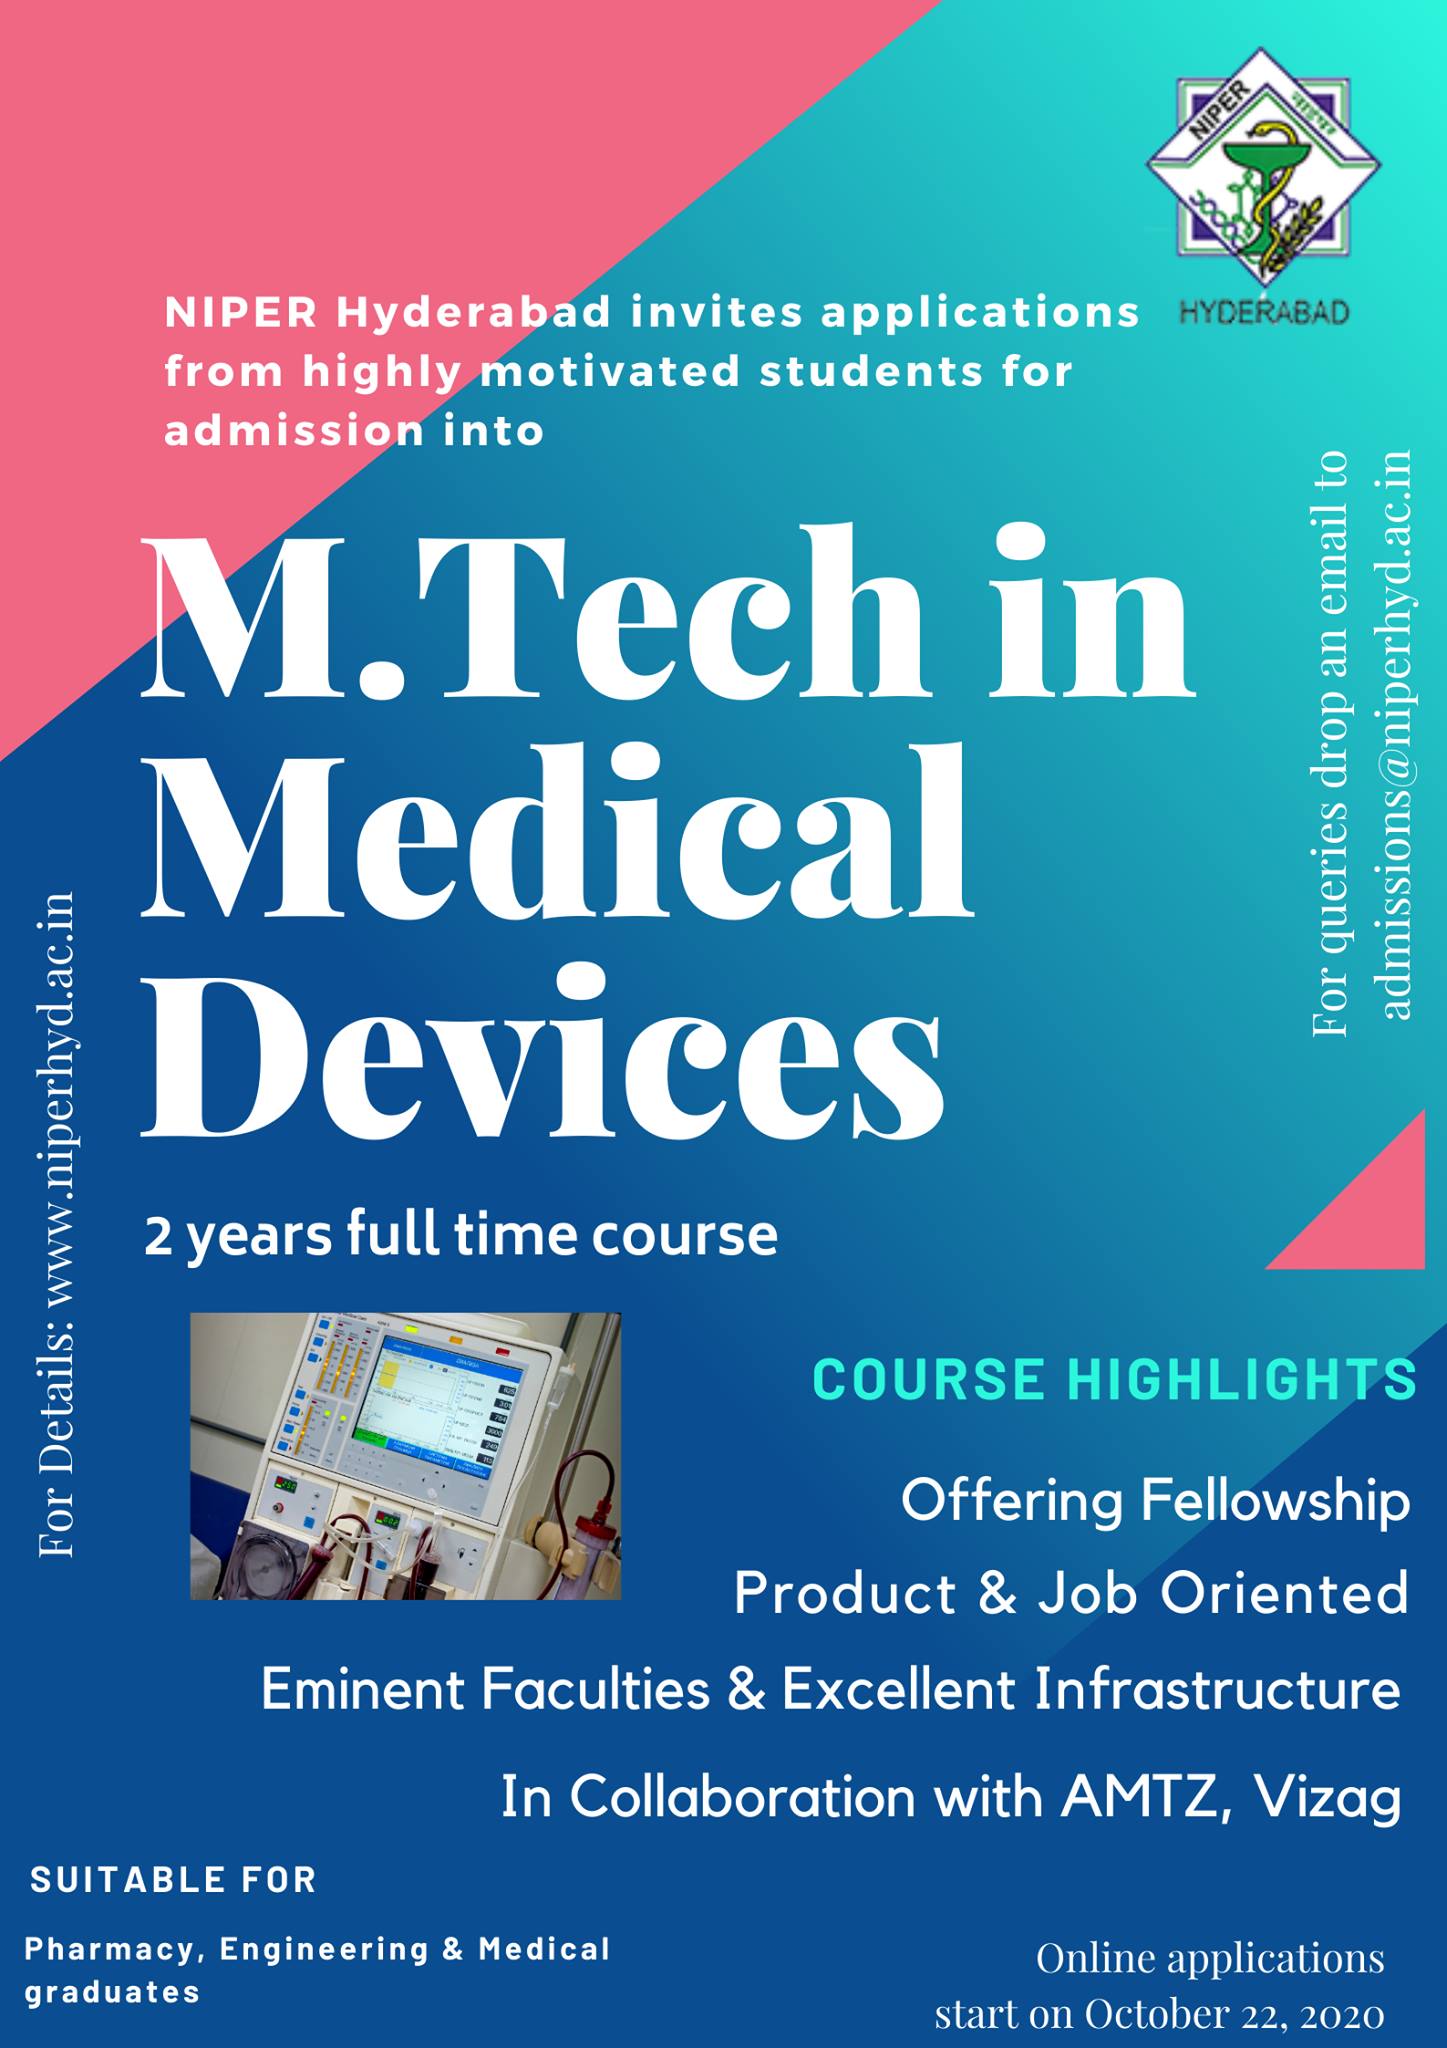 NIPERs Guwahati, Hyderabad and Mohali Launch a new MTech programme in Medical Devices